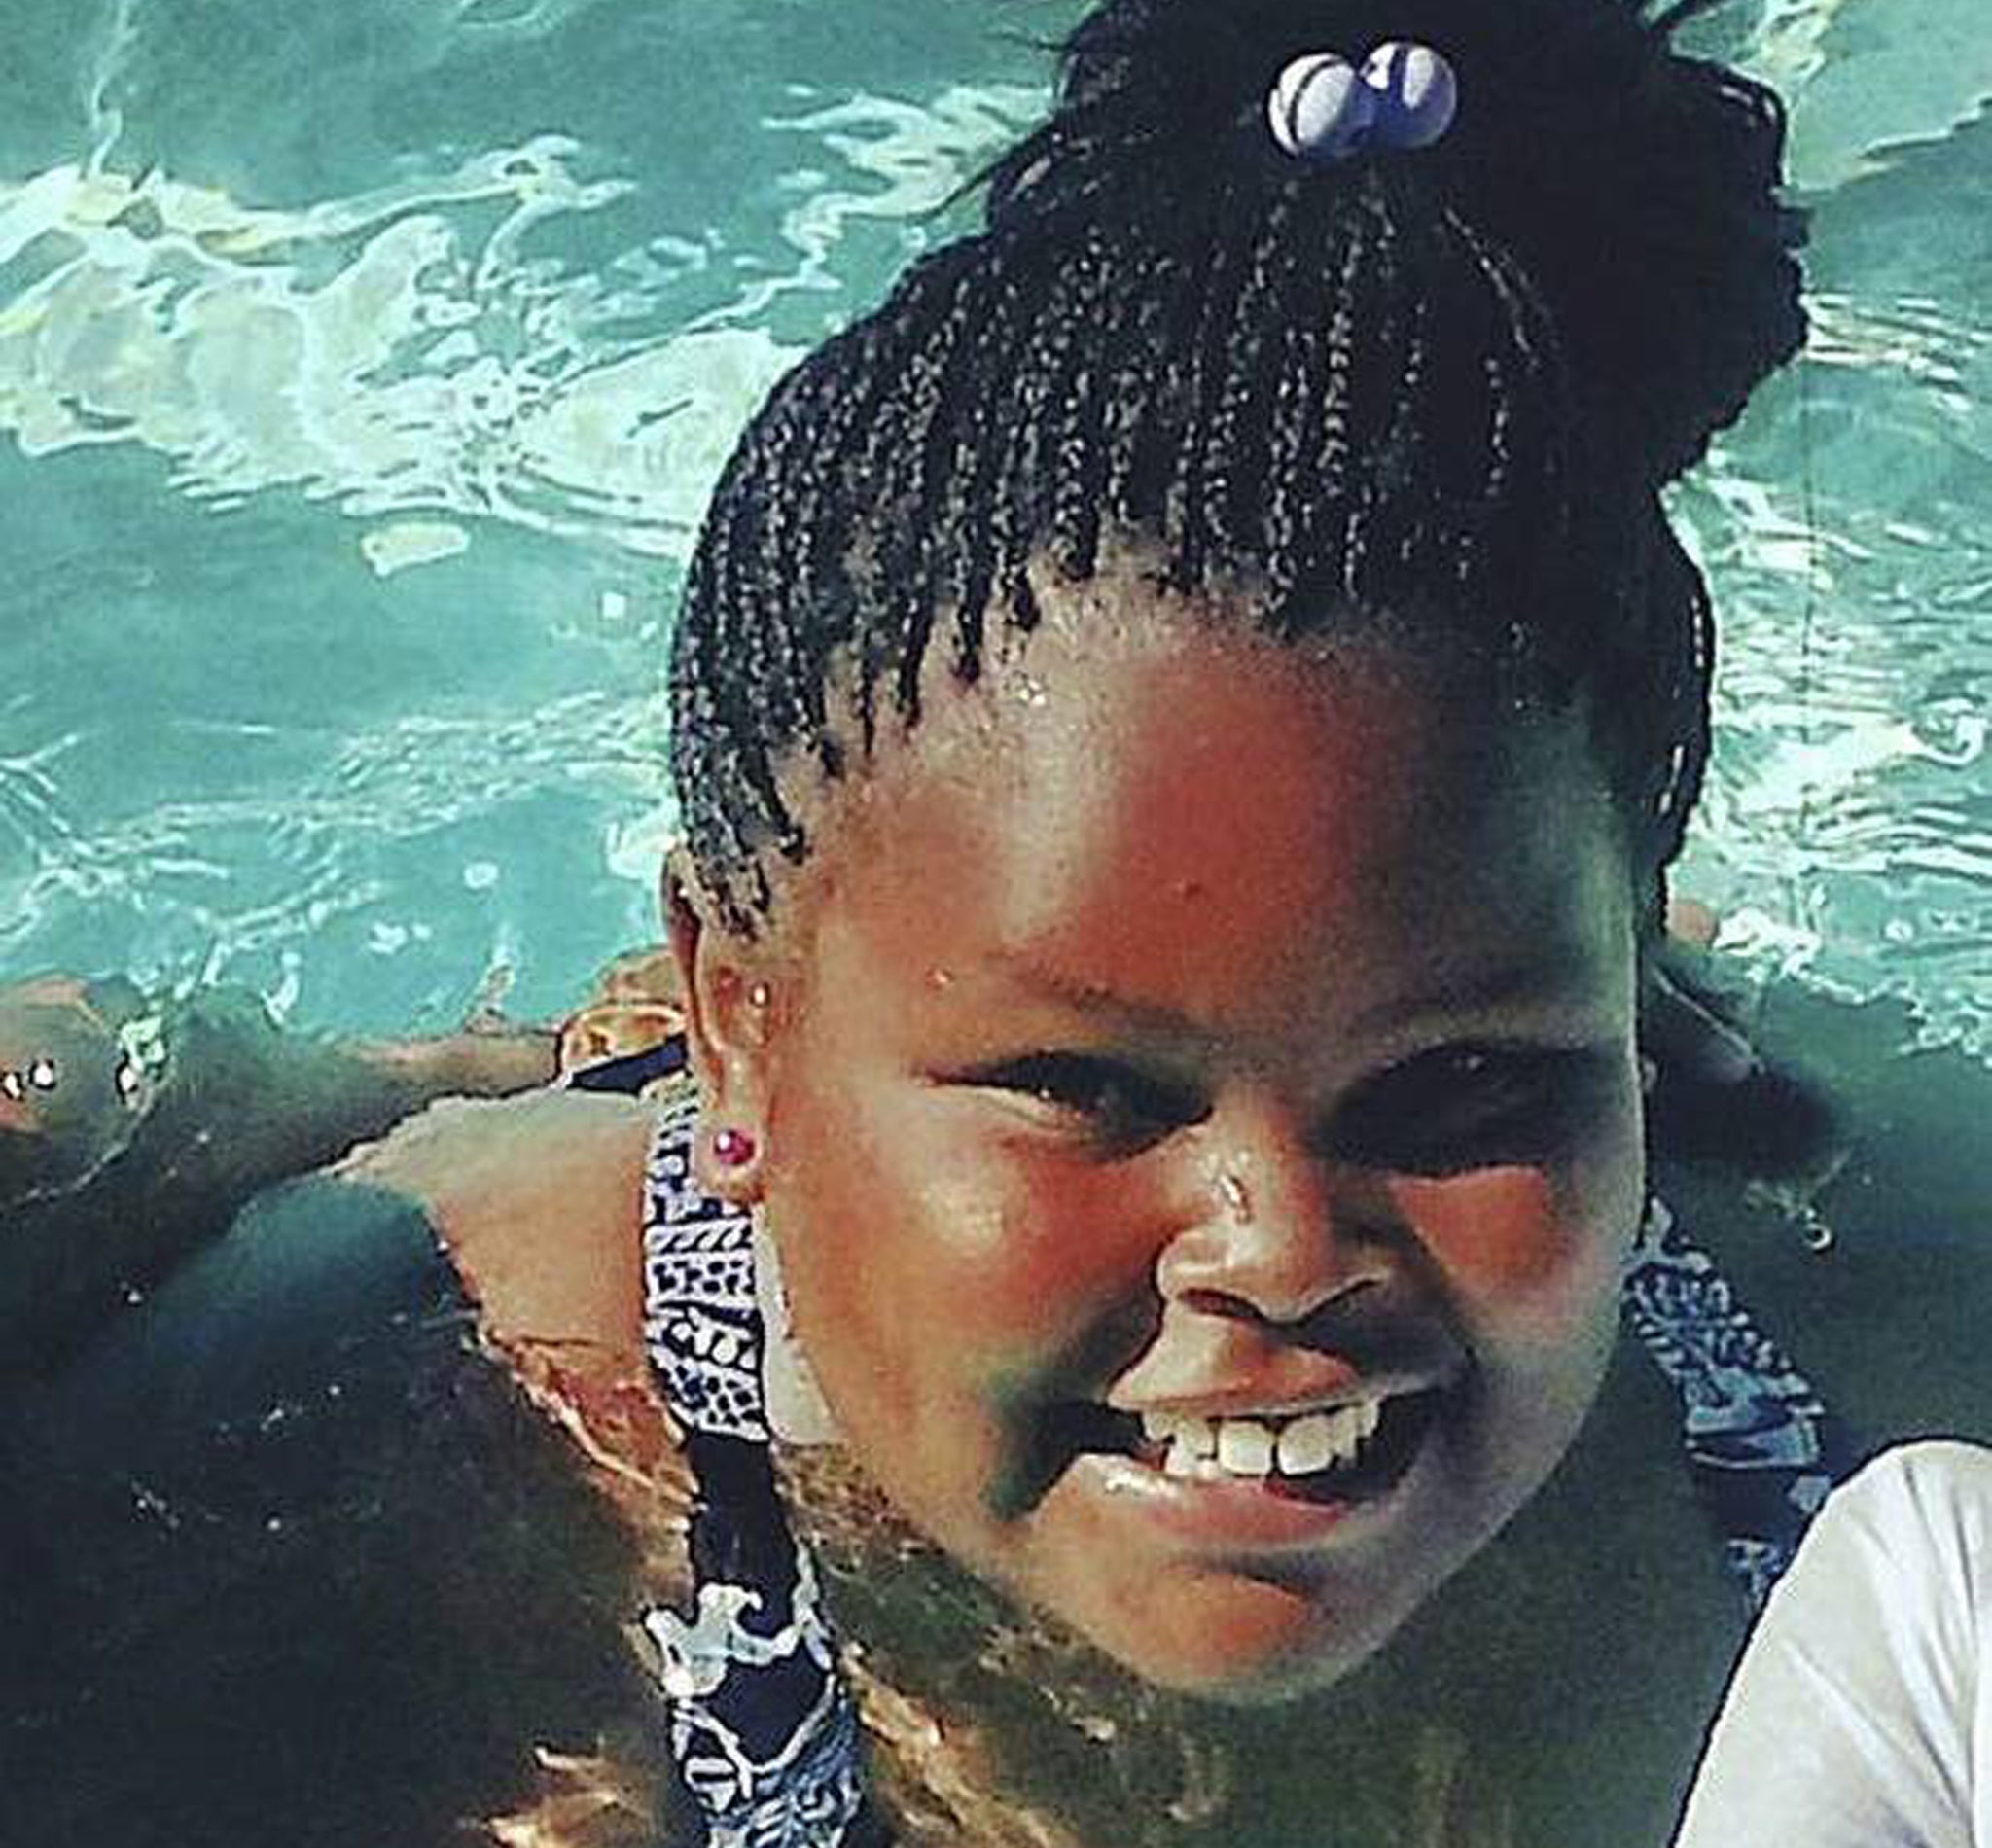 The family of 13-year-old Jahi McMath wish to move her to an extended-care facility